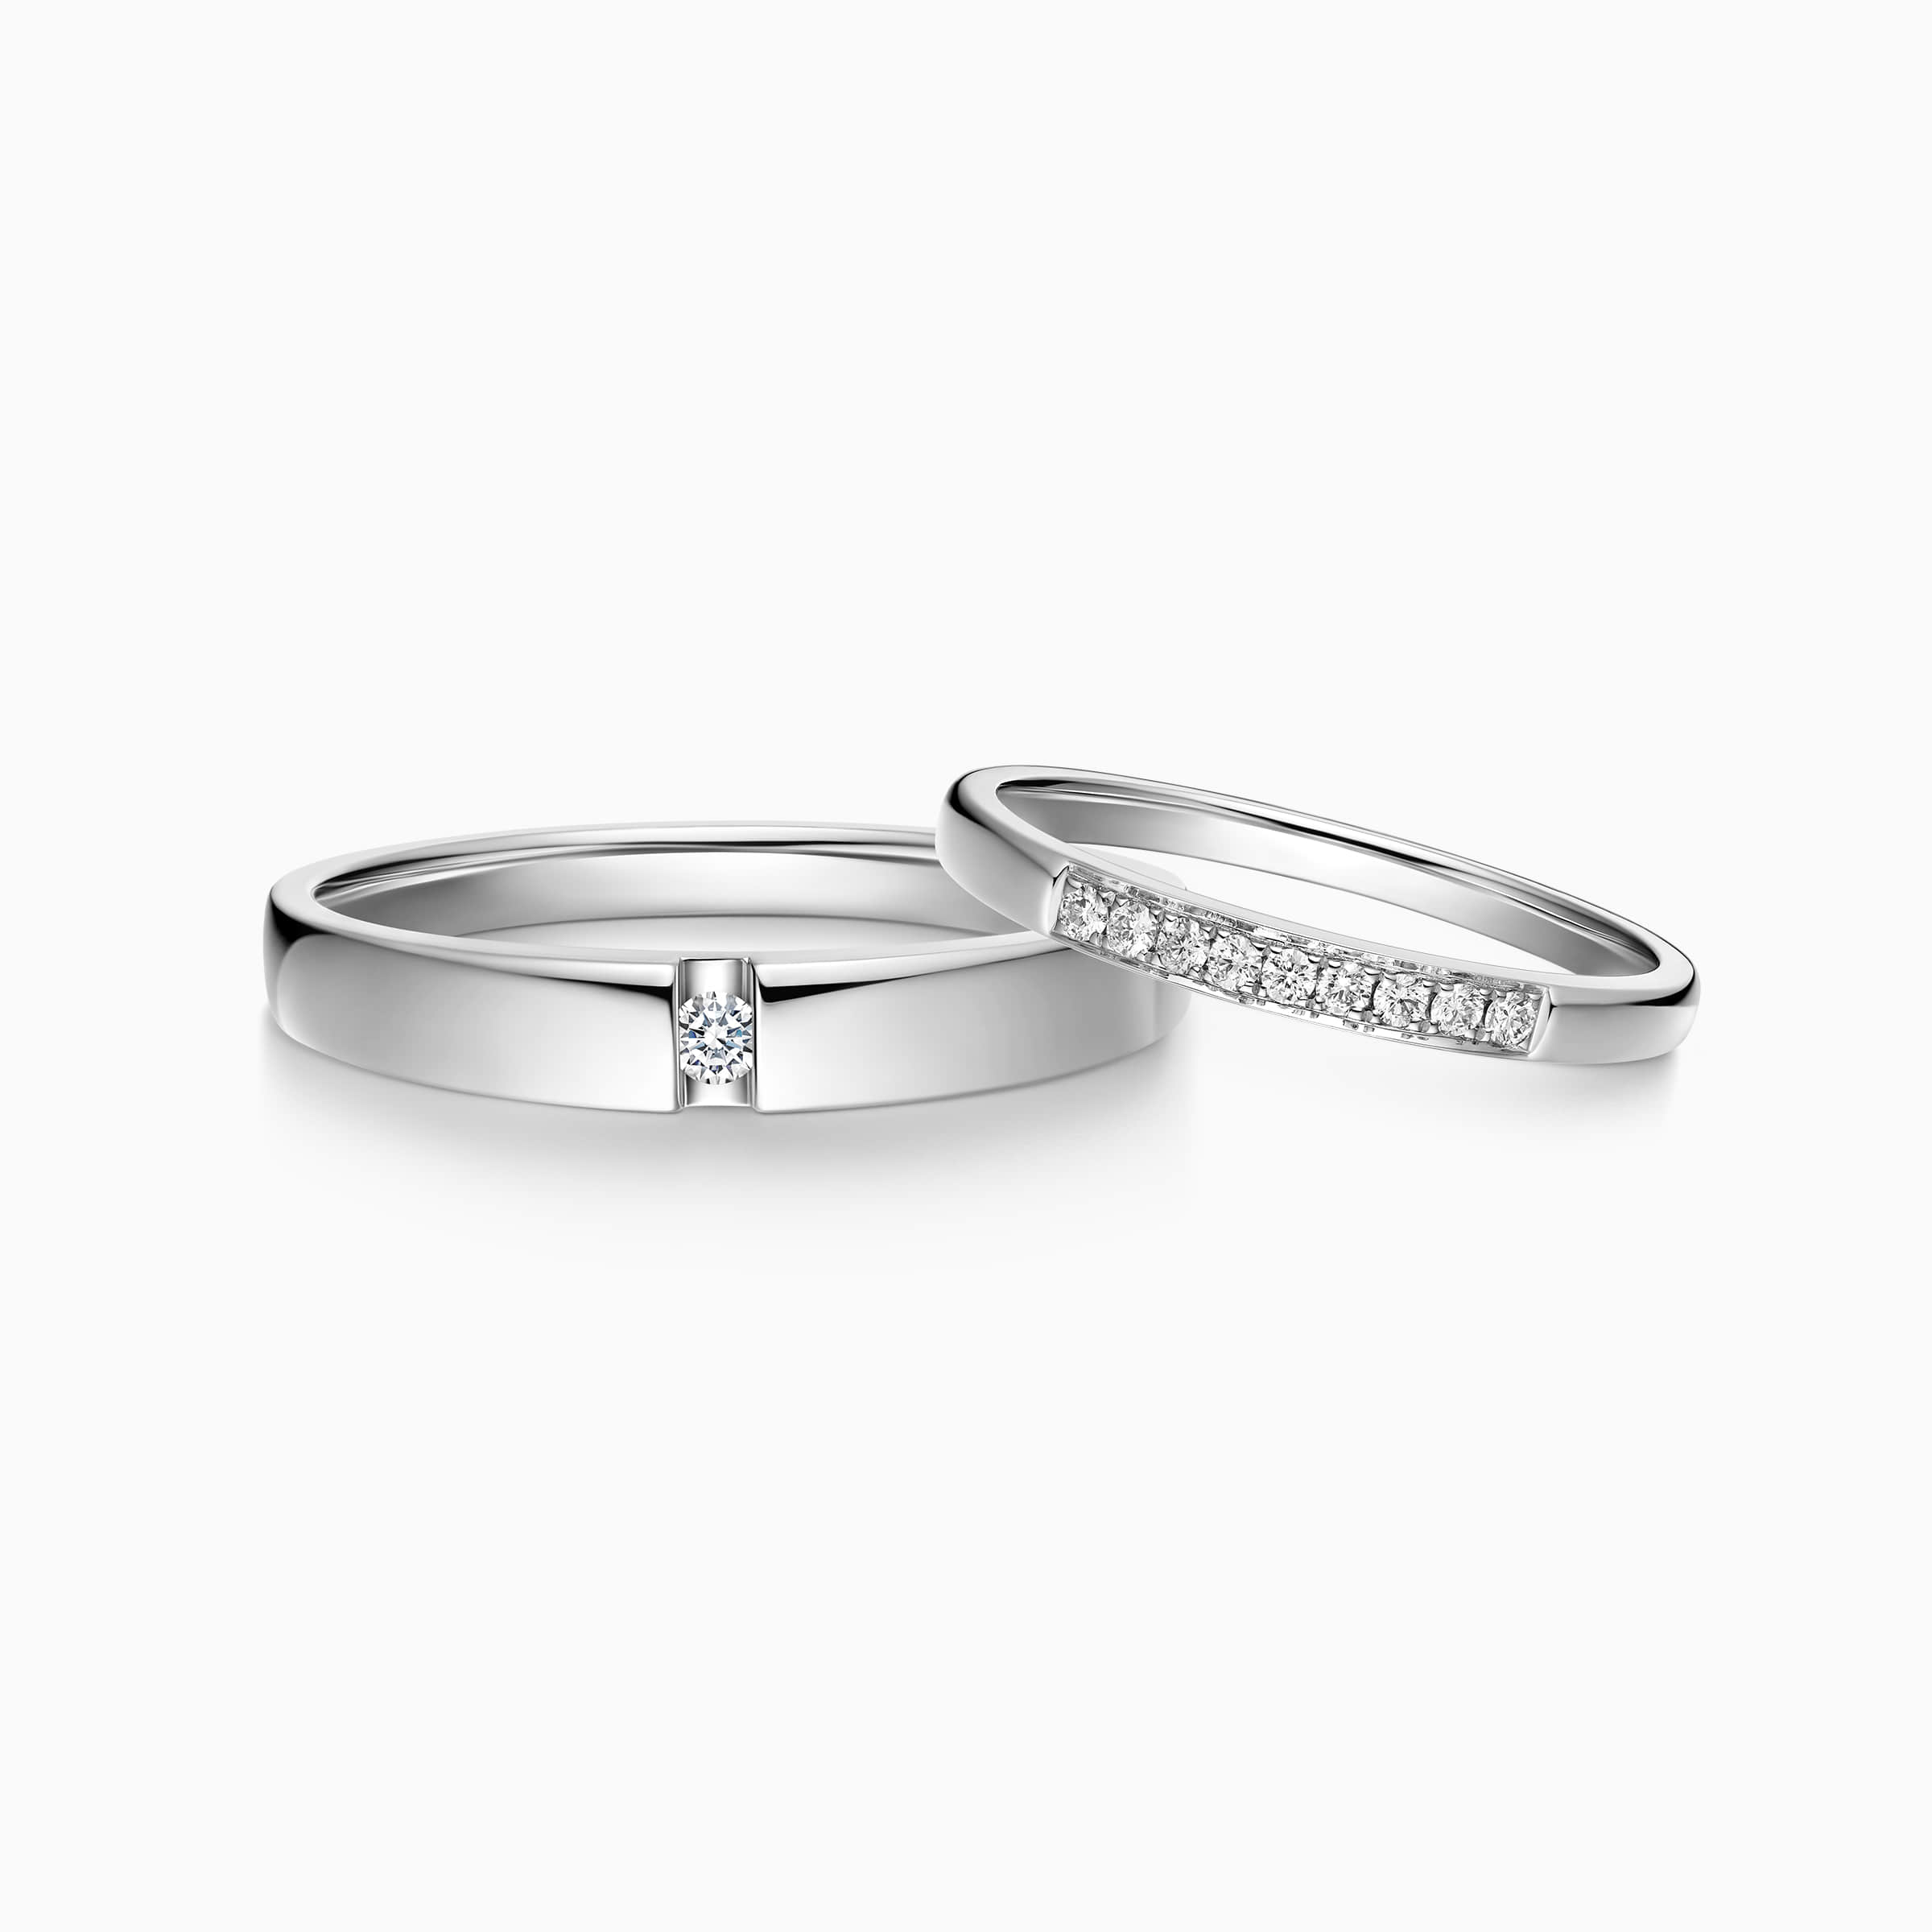 Darry Ring diamond wedding rings for couple